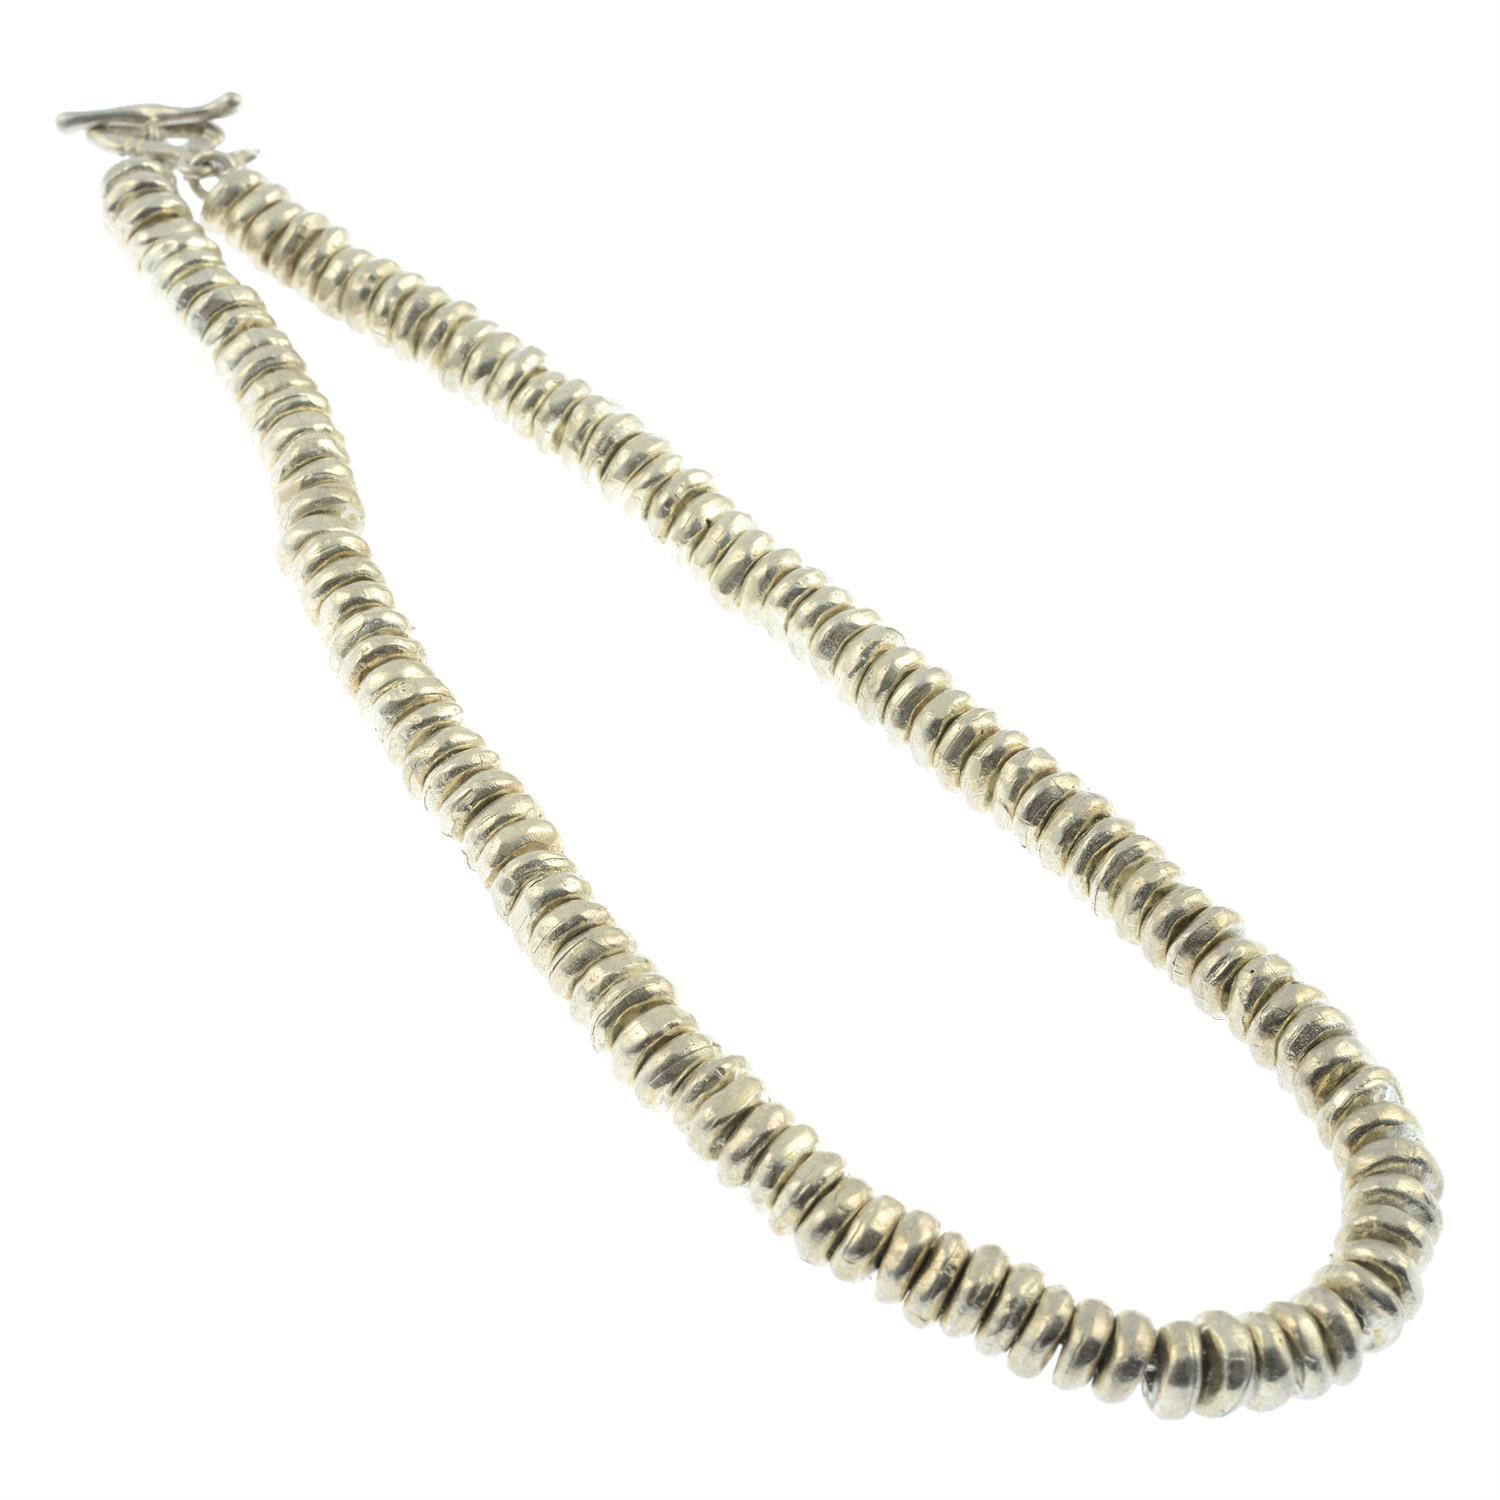 A silver bead necklace, by Dower & Hall. - Image 2 of 2